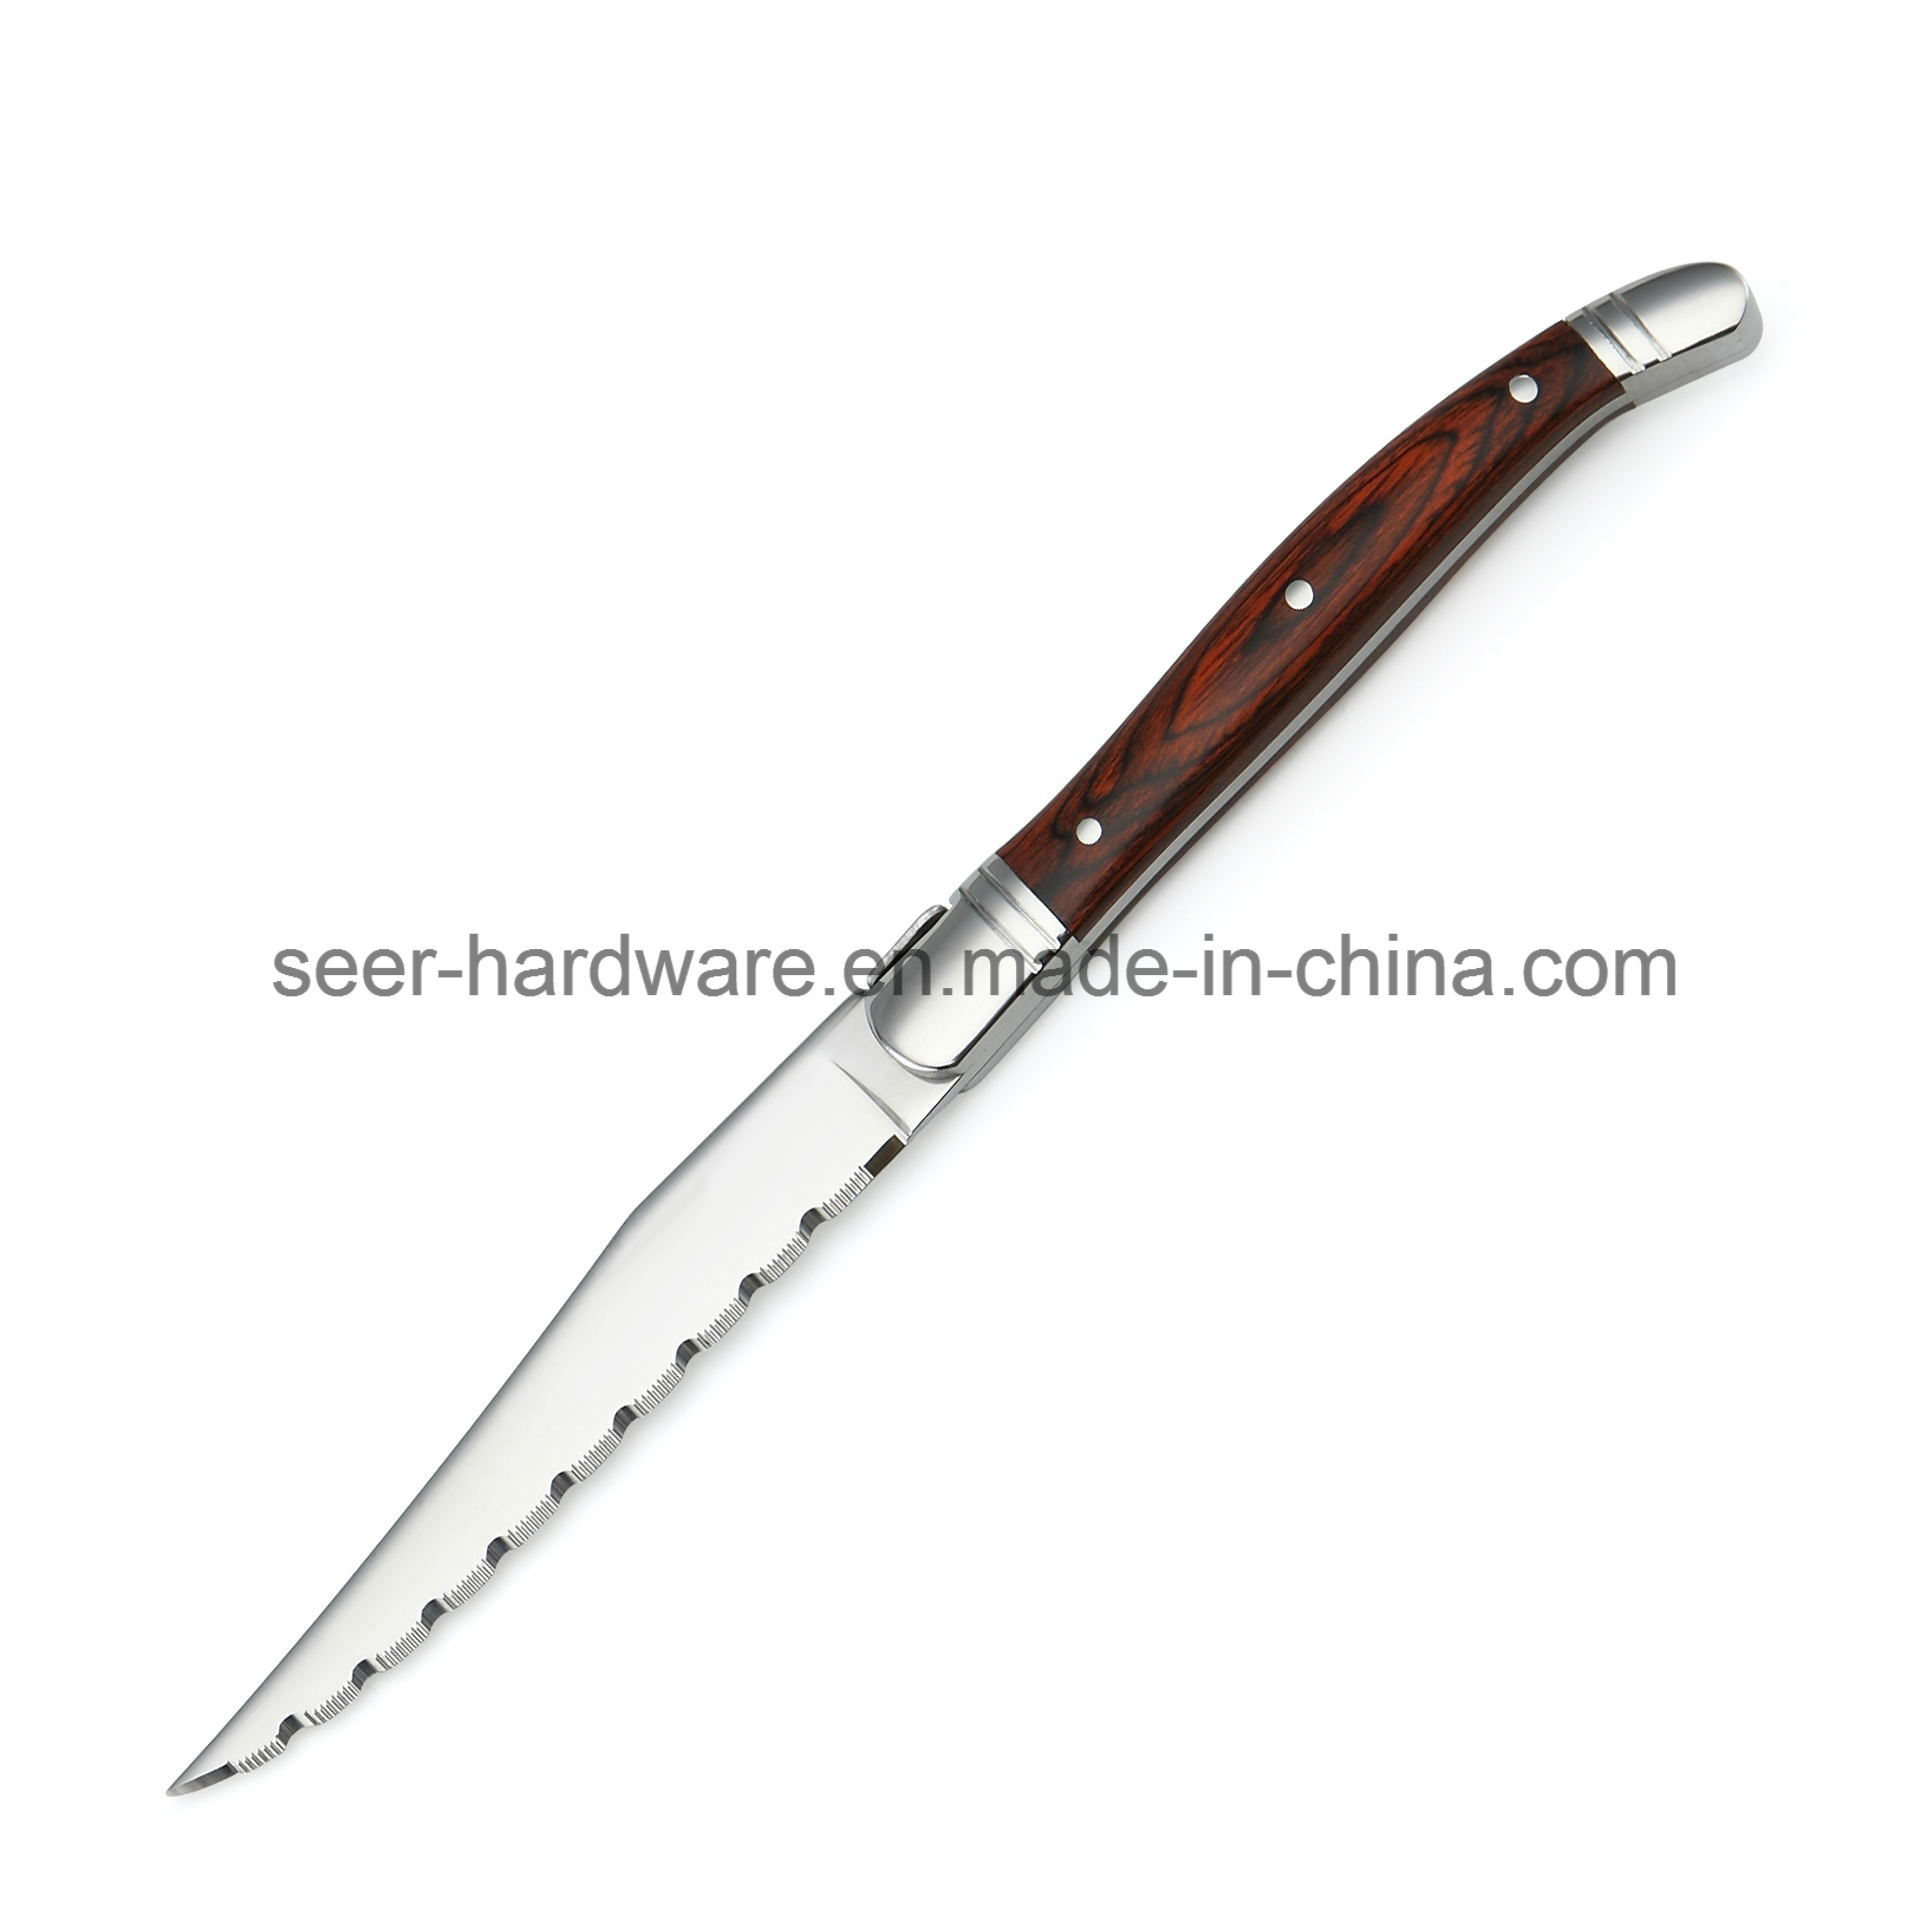 Hot Sale Wood Handle Laguiole Steak Knife and Stainless Steel Dinner Knife (SE-231)